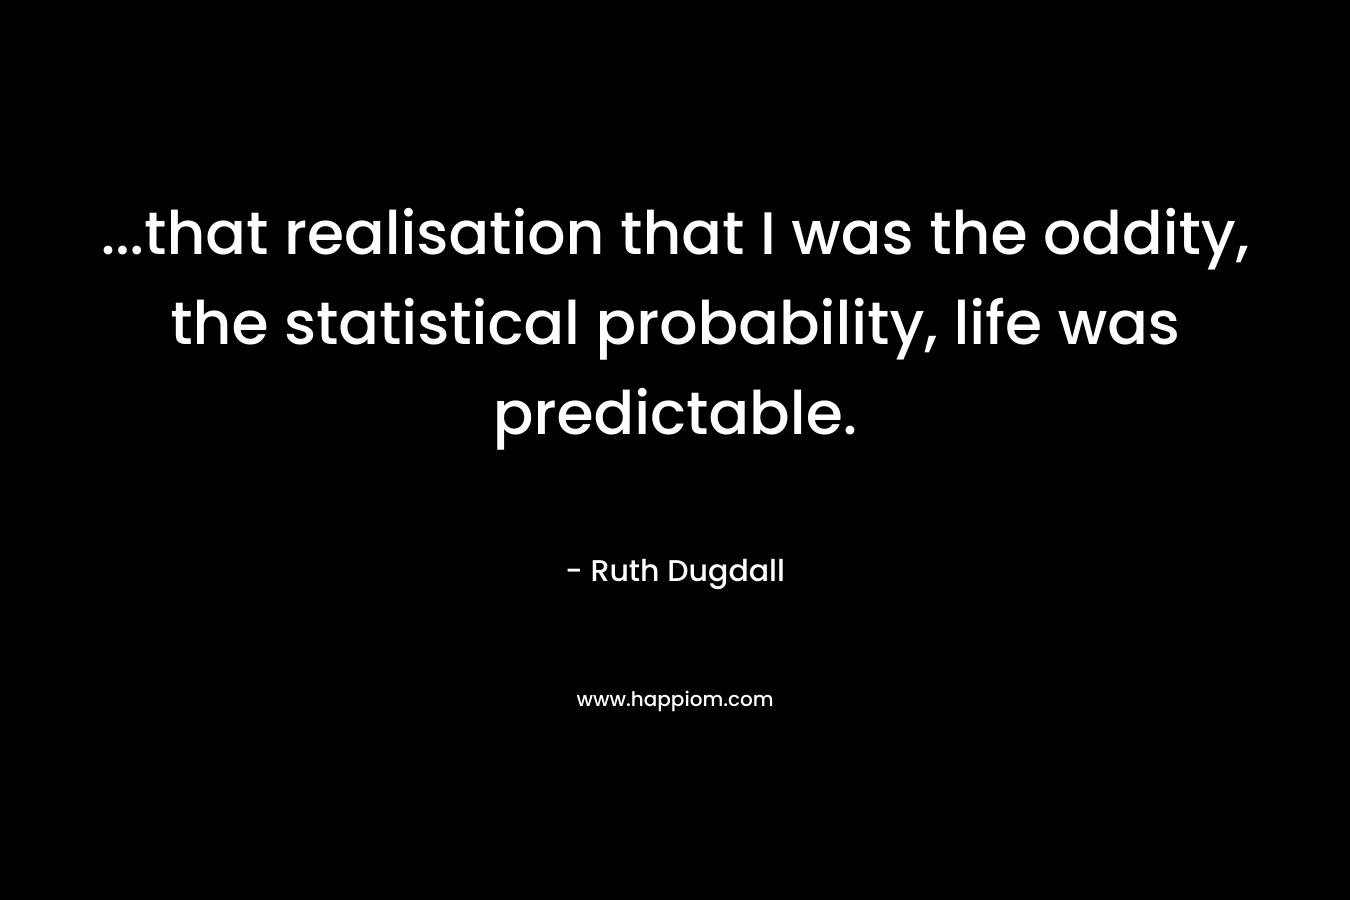 …that realisation that I was the oddity, the statistical probability, life was predictable. – Ruth Dugdall